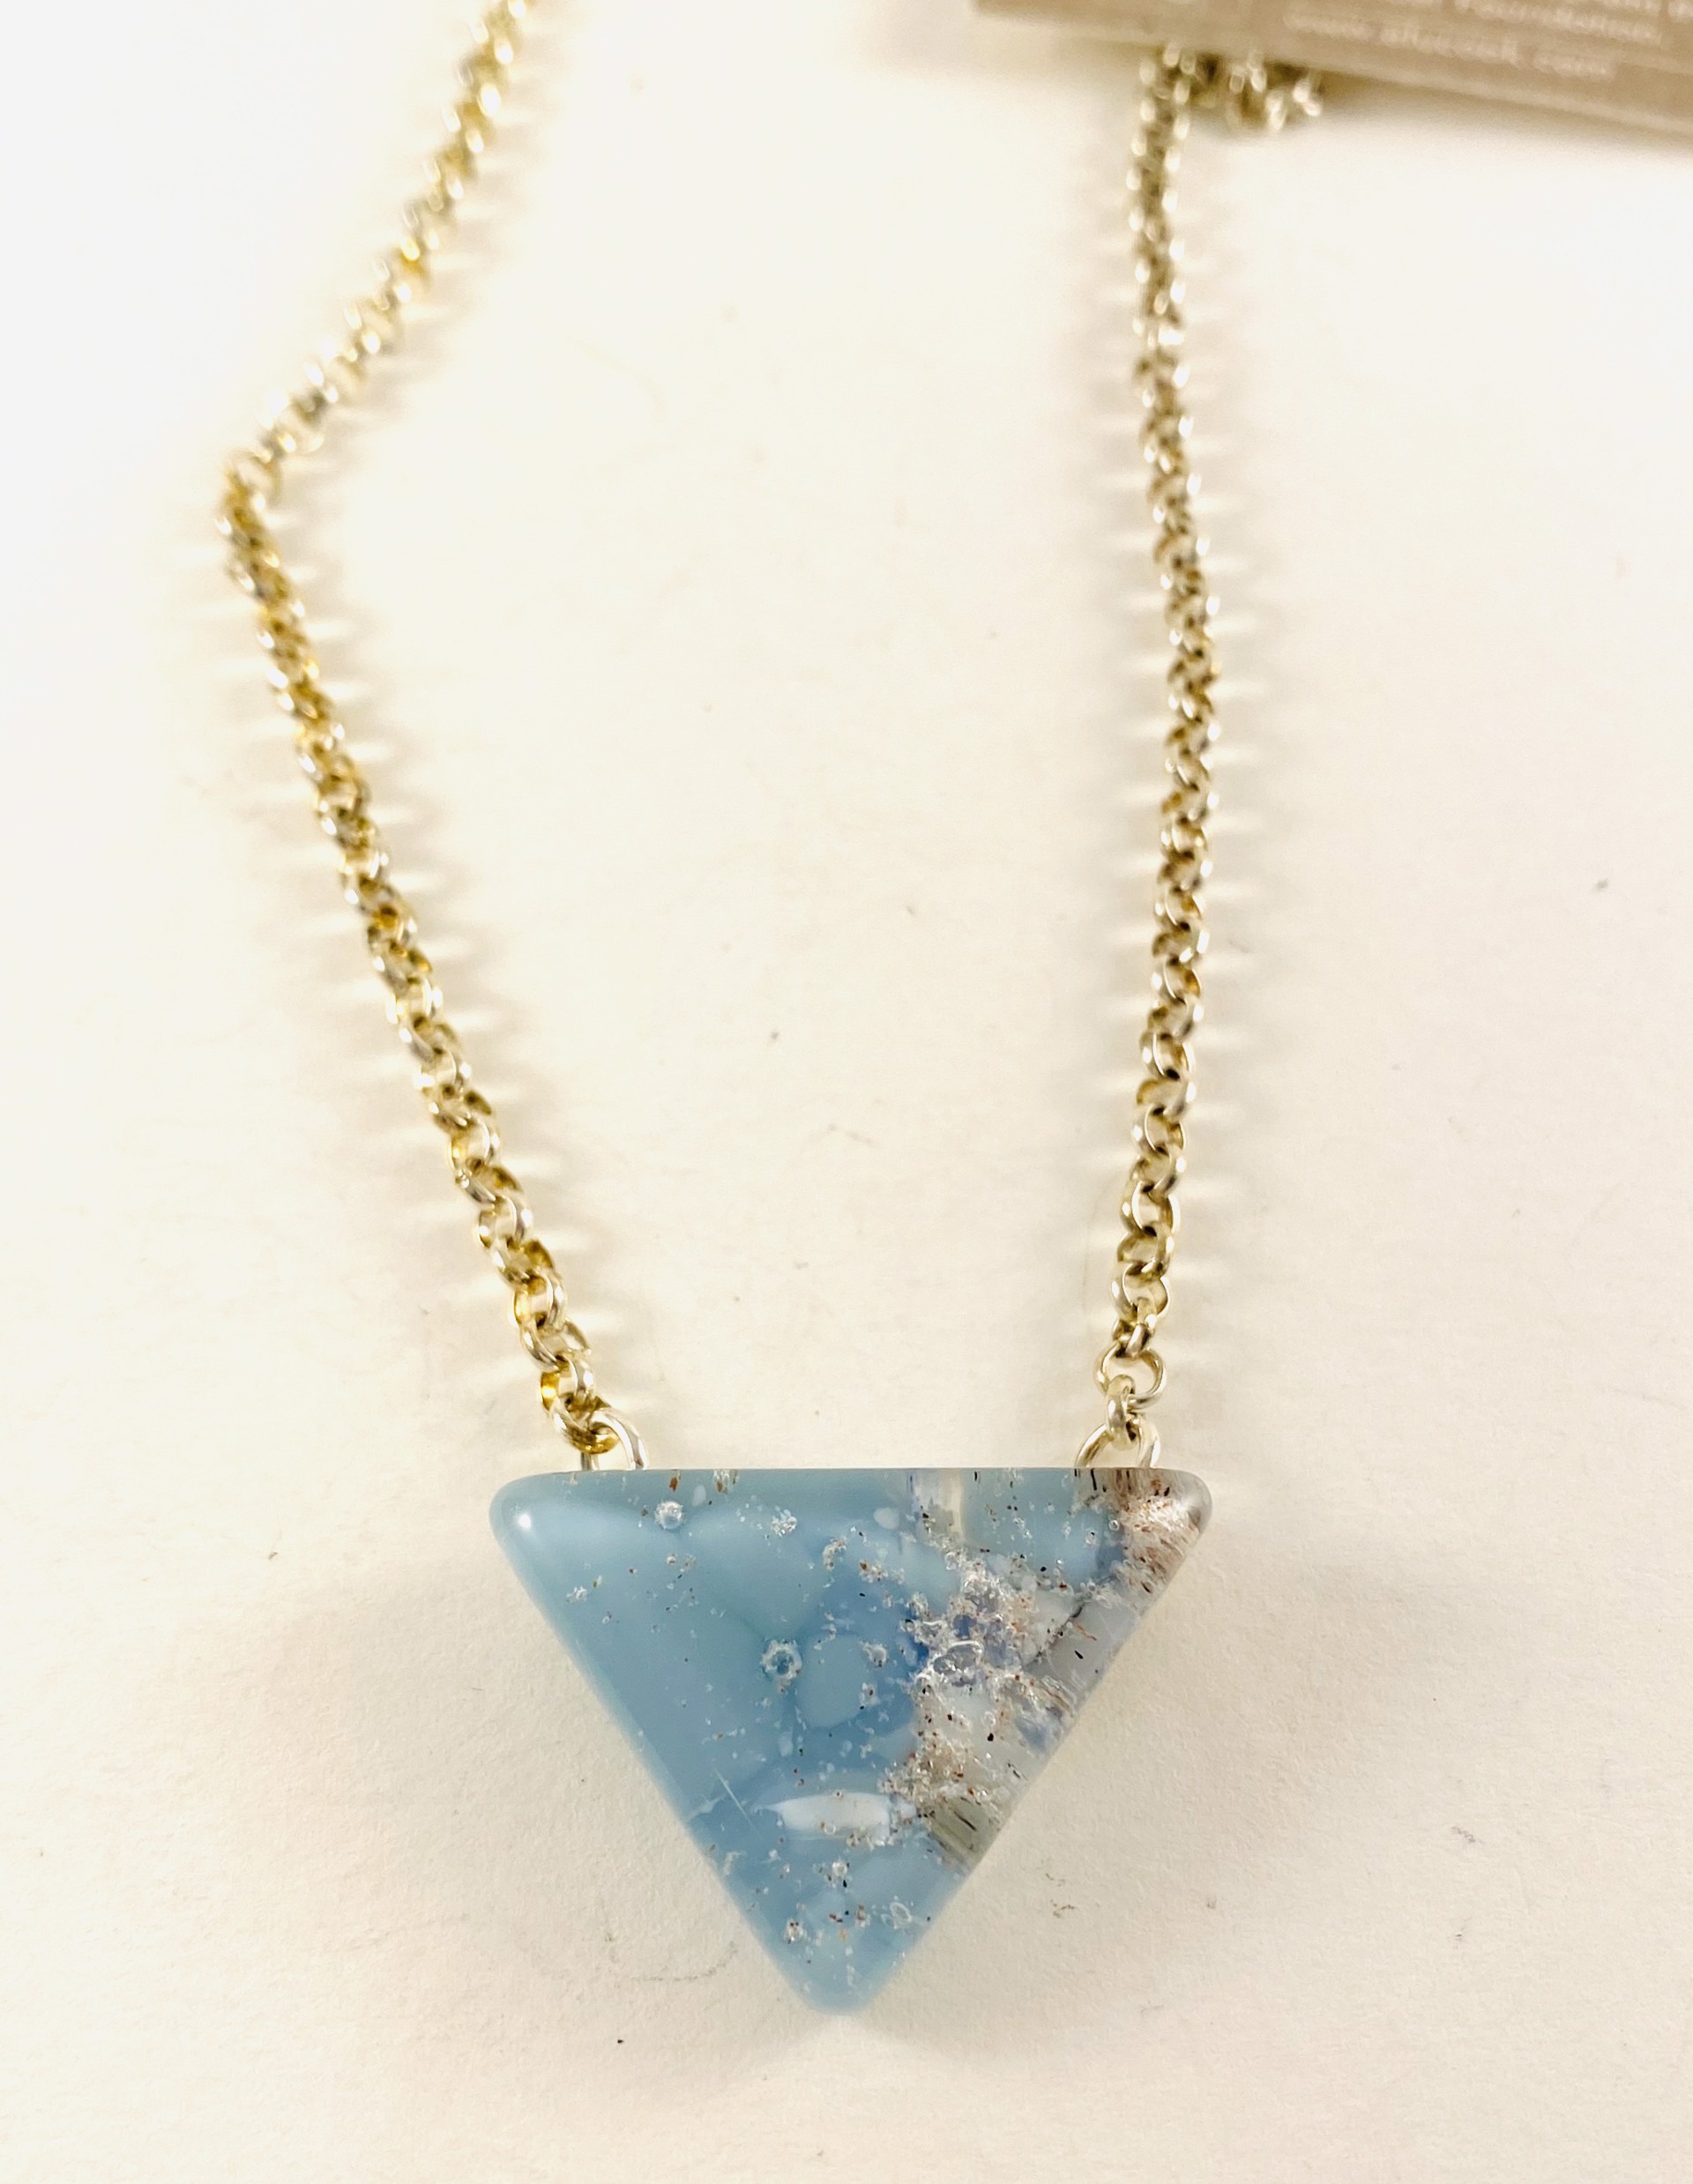 Mini Triangle Necklace 16" chain, 3x by Emily Cook